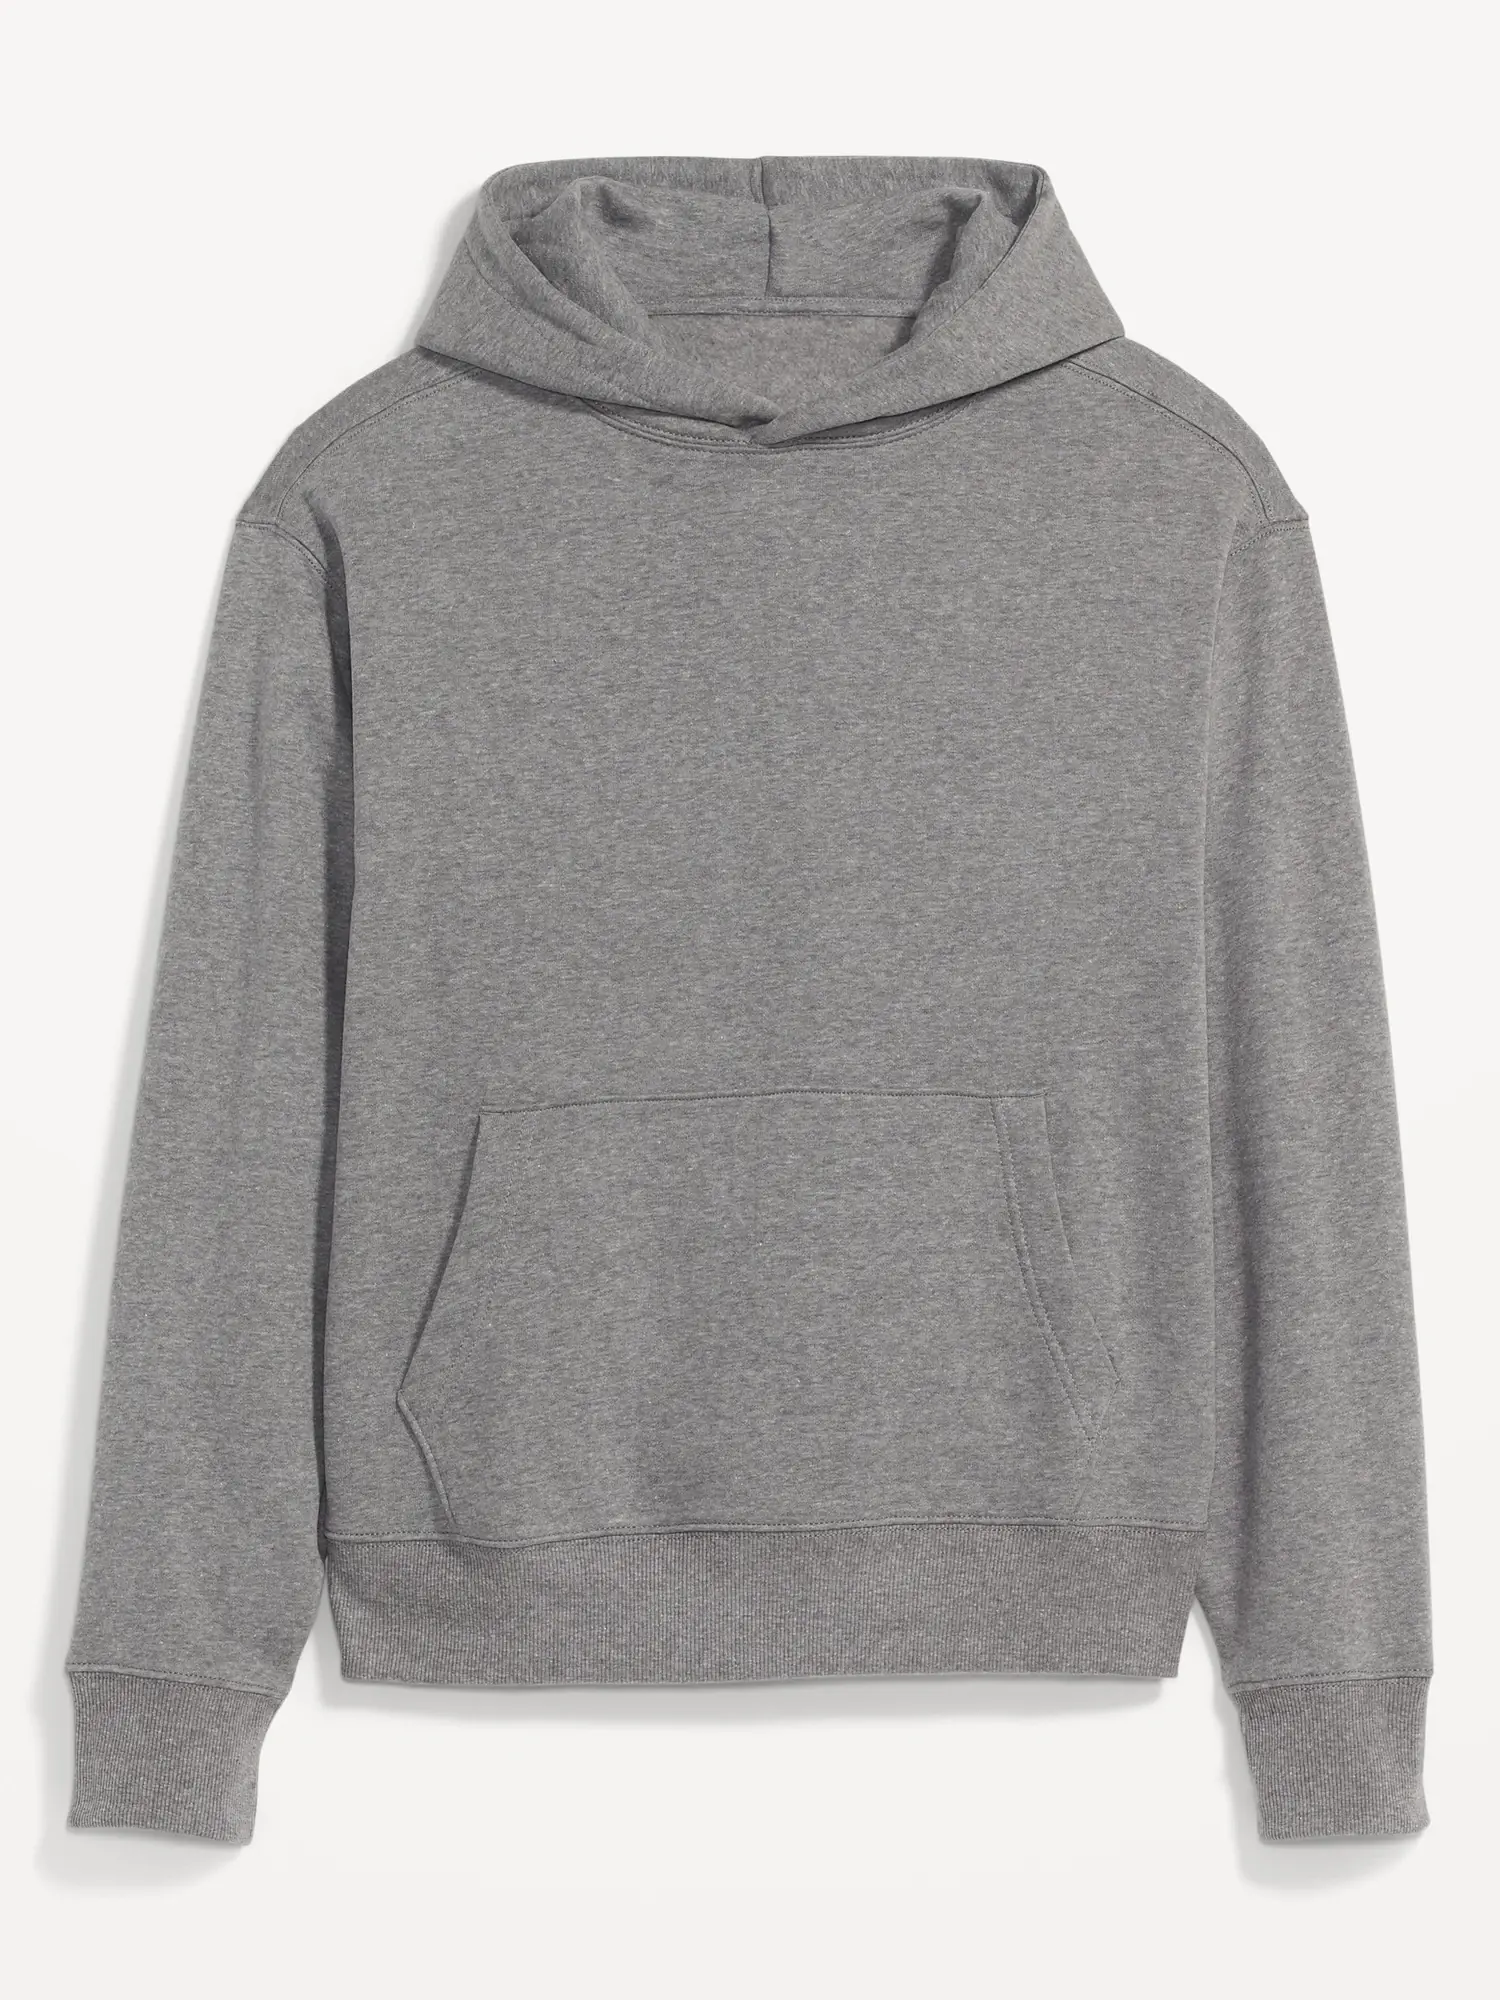 Old Navy Rotation Pullover Hoodie gray. 1